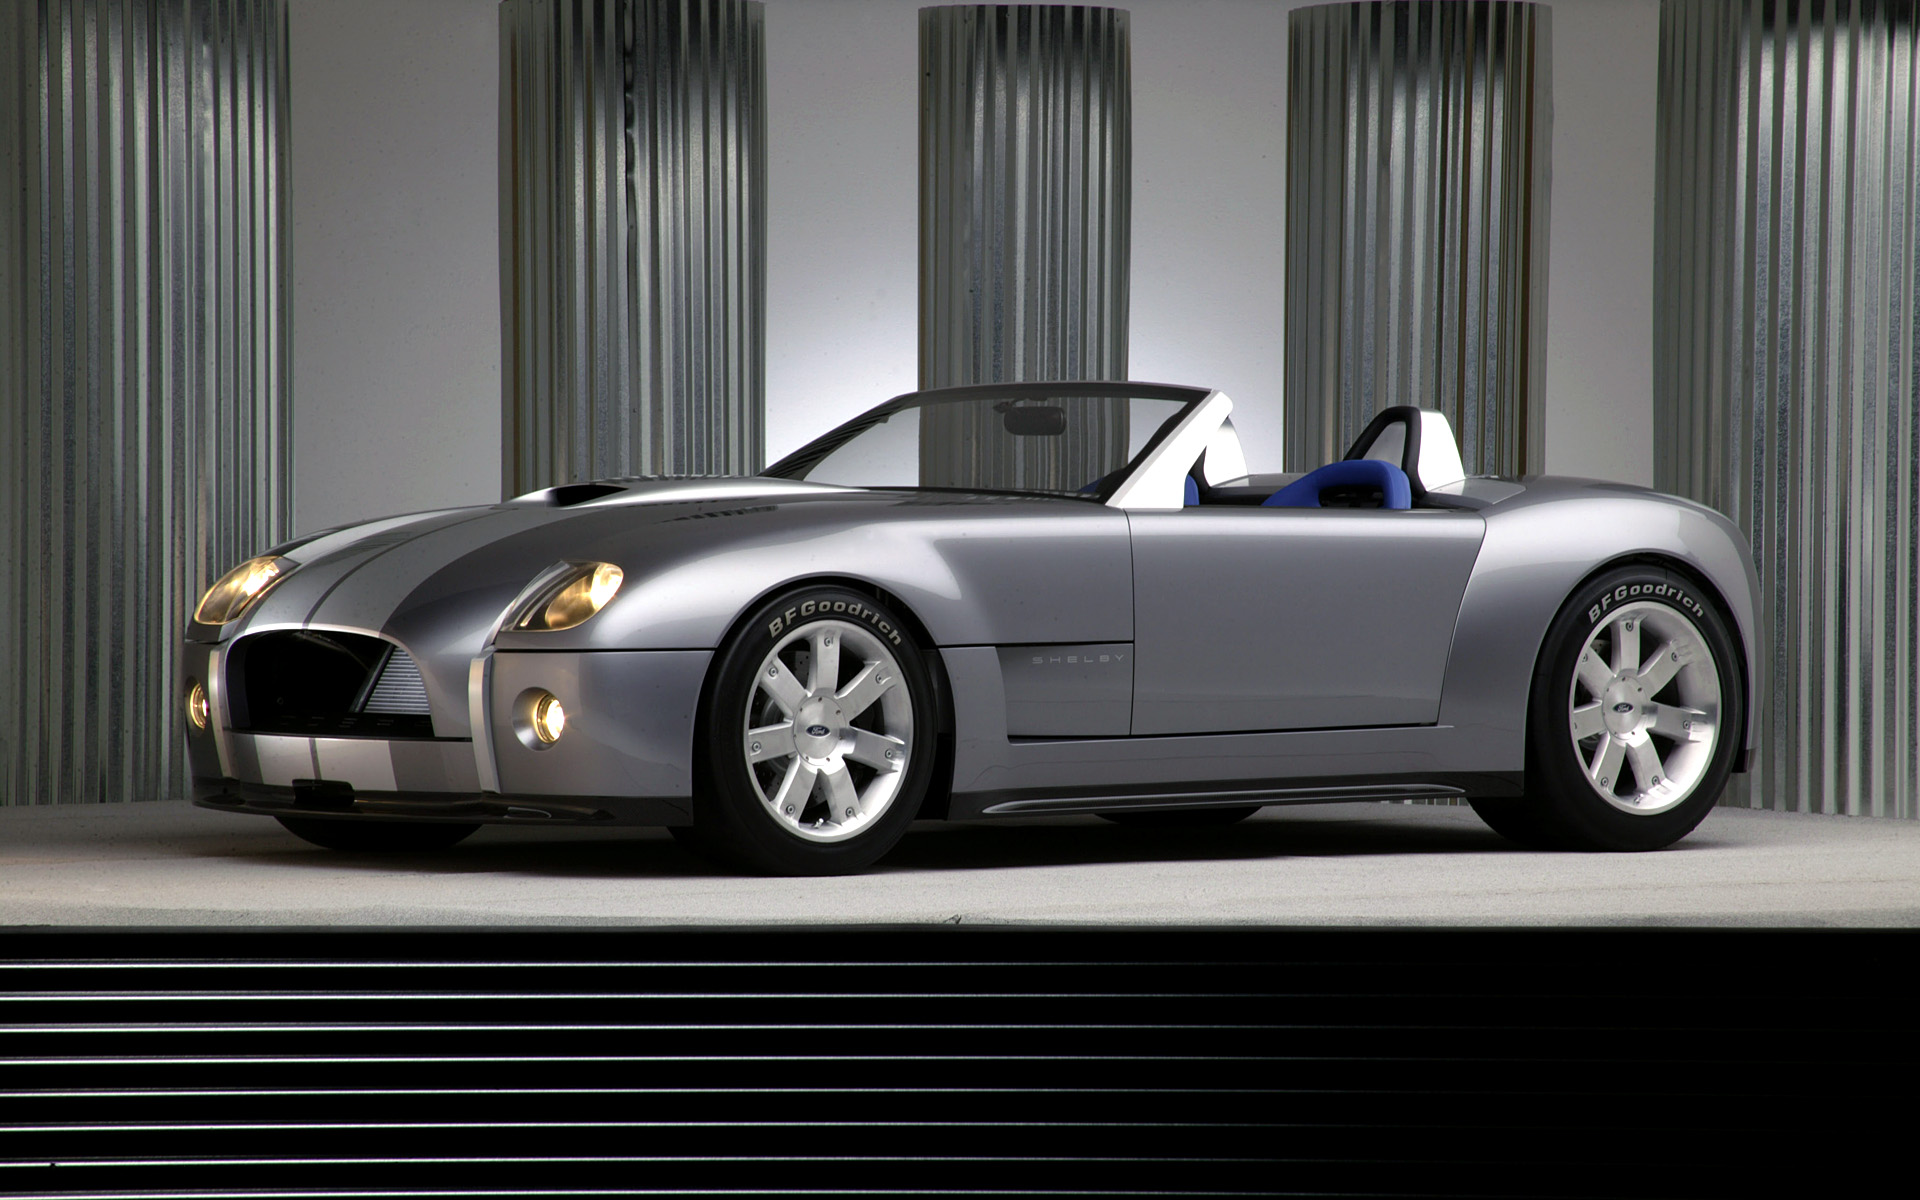  2004 Ford Shelby Cobra Concept Wallpaper.